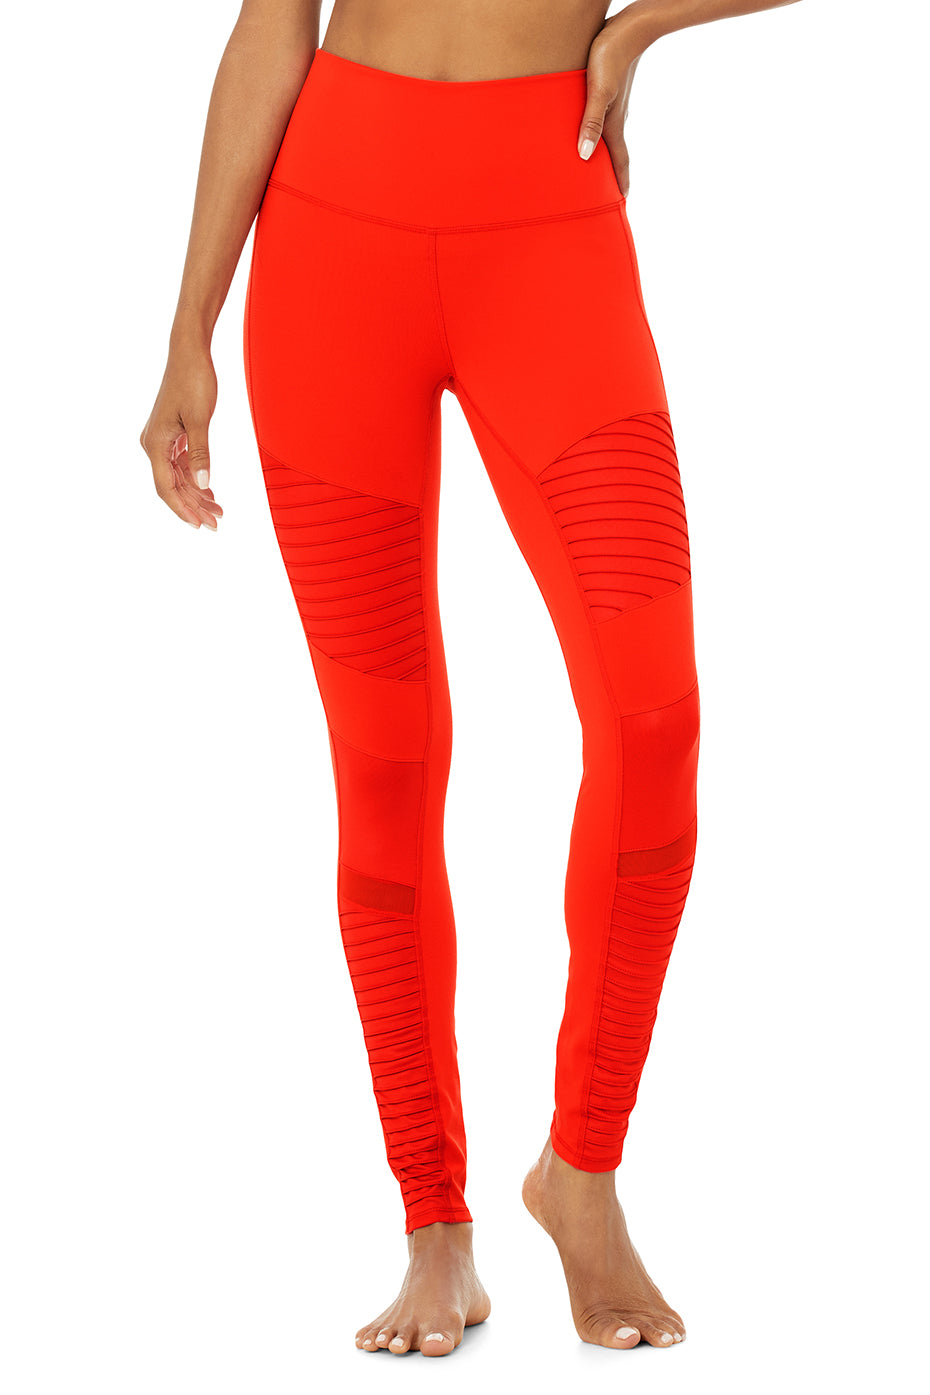 High-Waist Moto Legging in Cherry by Alo Yoga - Work Well Daily